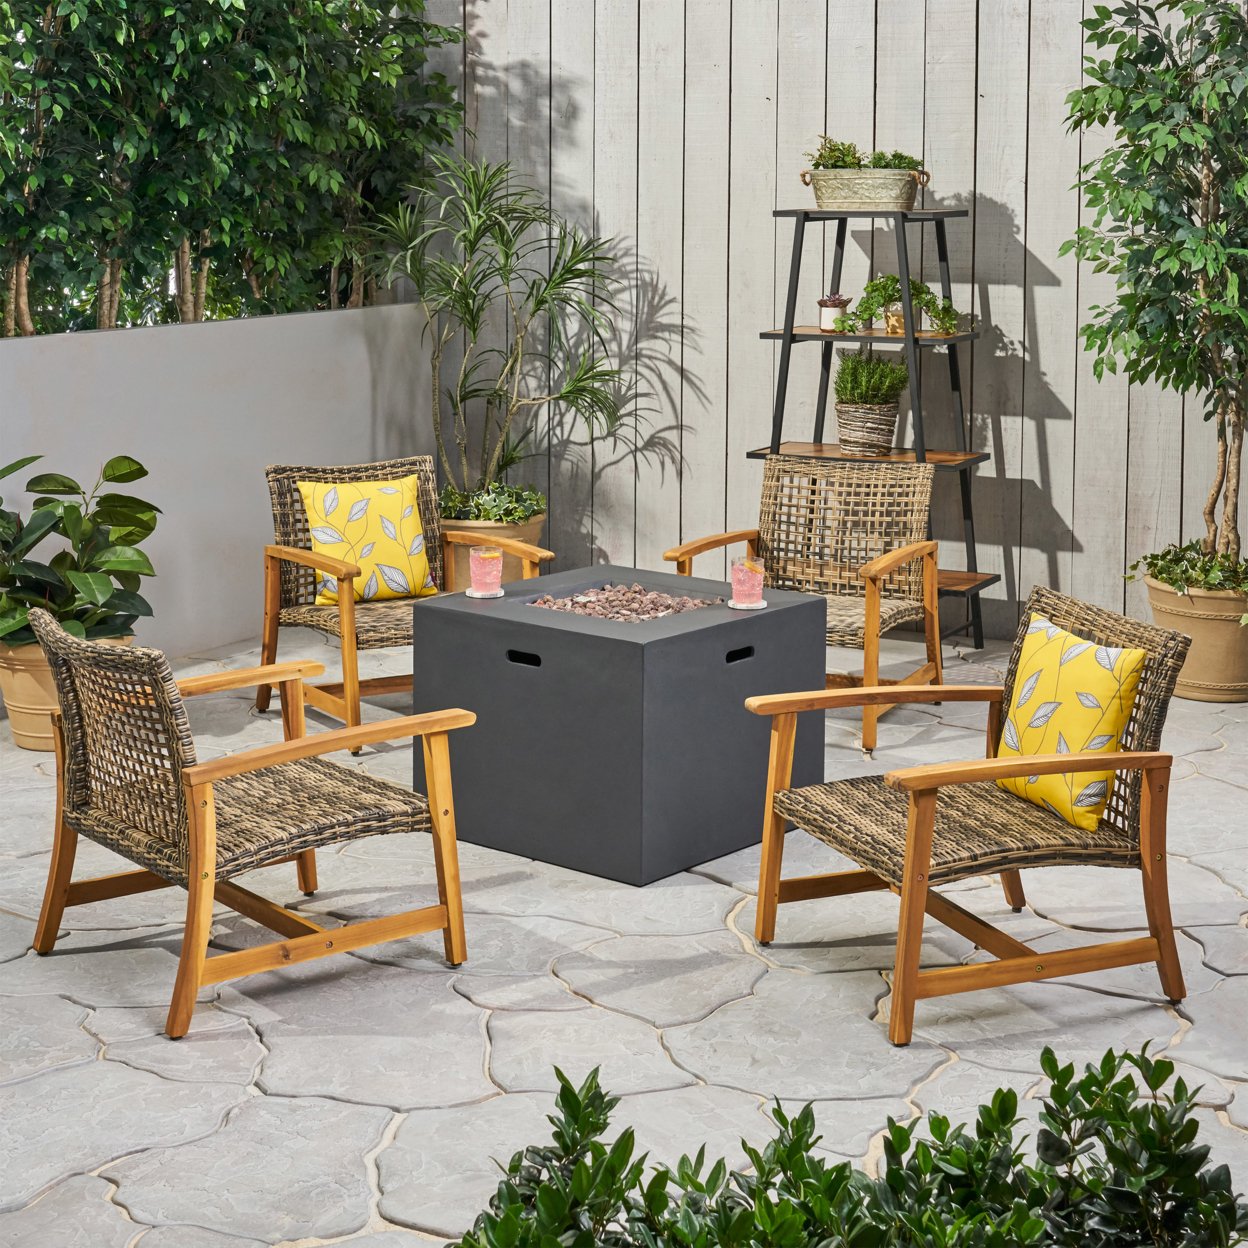 Carry Outdoor 5 Piece Wood And Wicker Club Chairs And Fire Pit Set - Mixed Black, Light Gray Washed Finish, Dark Gray